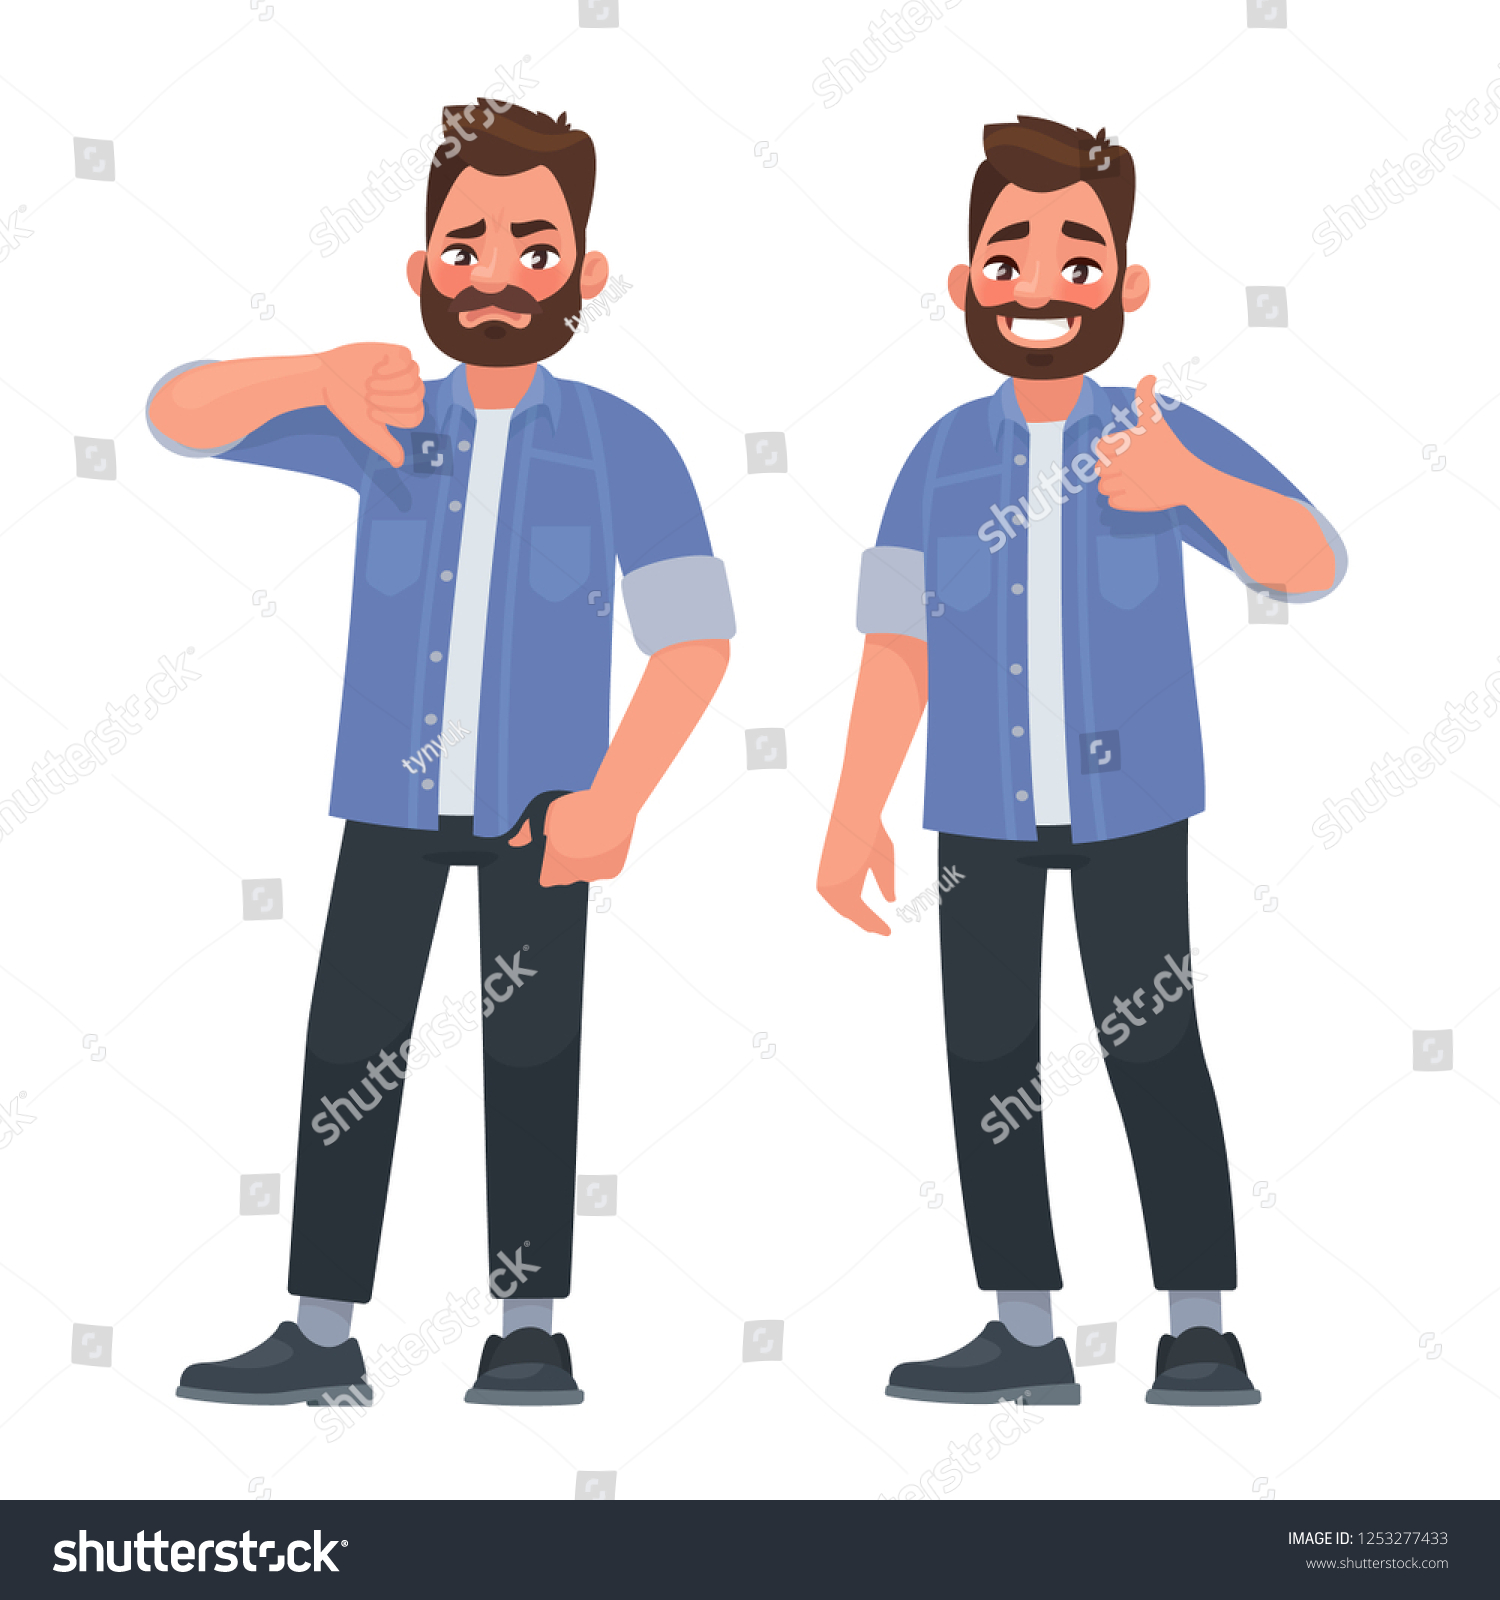 SVG of Like and dislike. Good and bad. A man shows a gesture of approval and disapproval. Vector illustration in cartoon style. svg